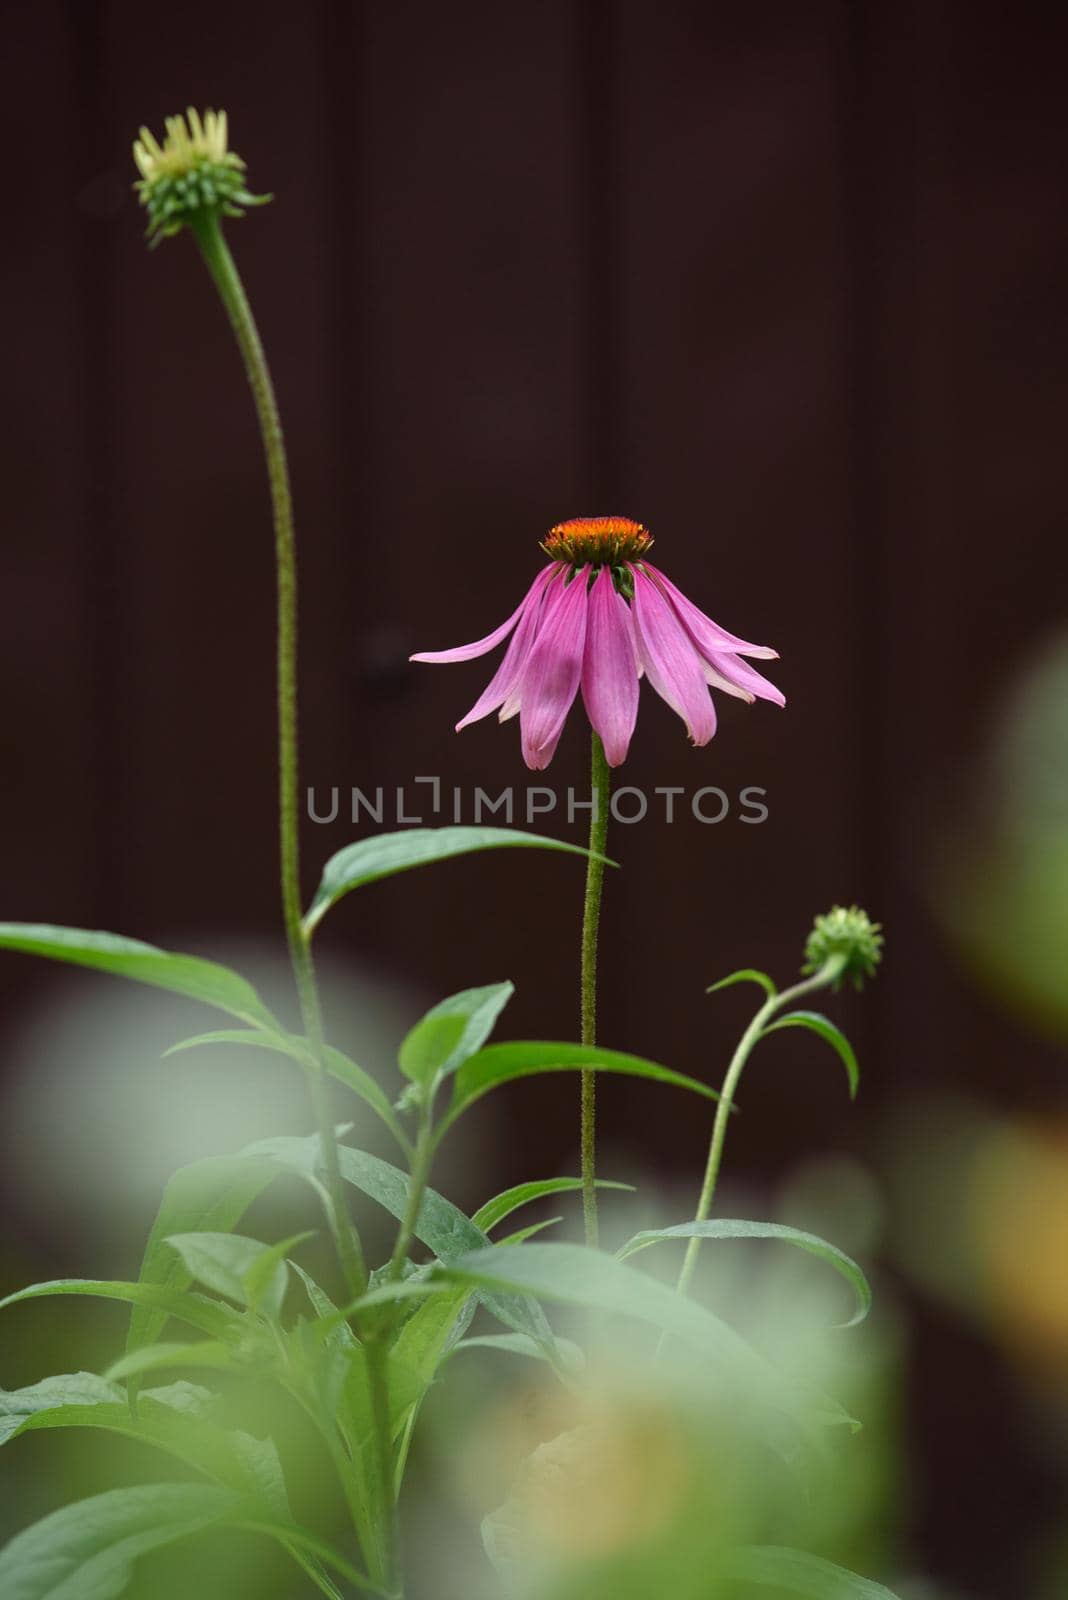 A close-up of an echinacea flower on a flower bed in the garden.